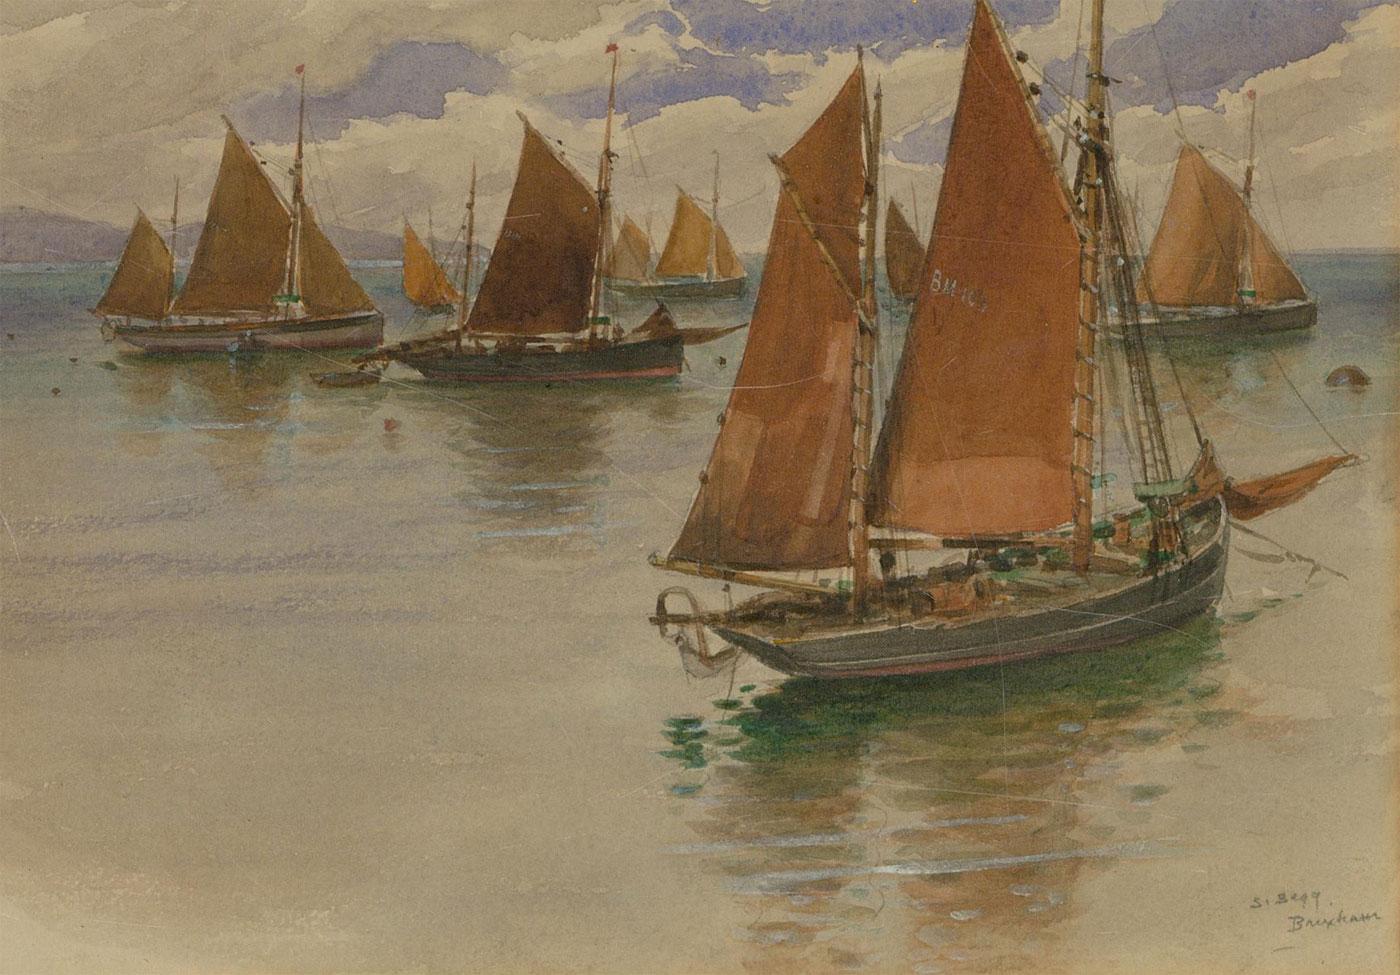 Samuel Begg (1854-1936) - Early 20th Century Watercolour, Brixham Harbour - Brown Figurative Art by Unknown